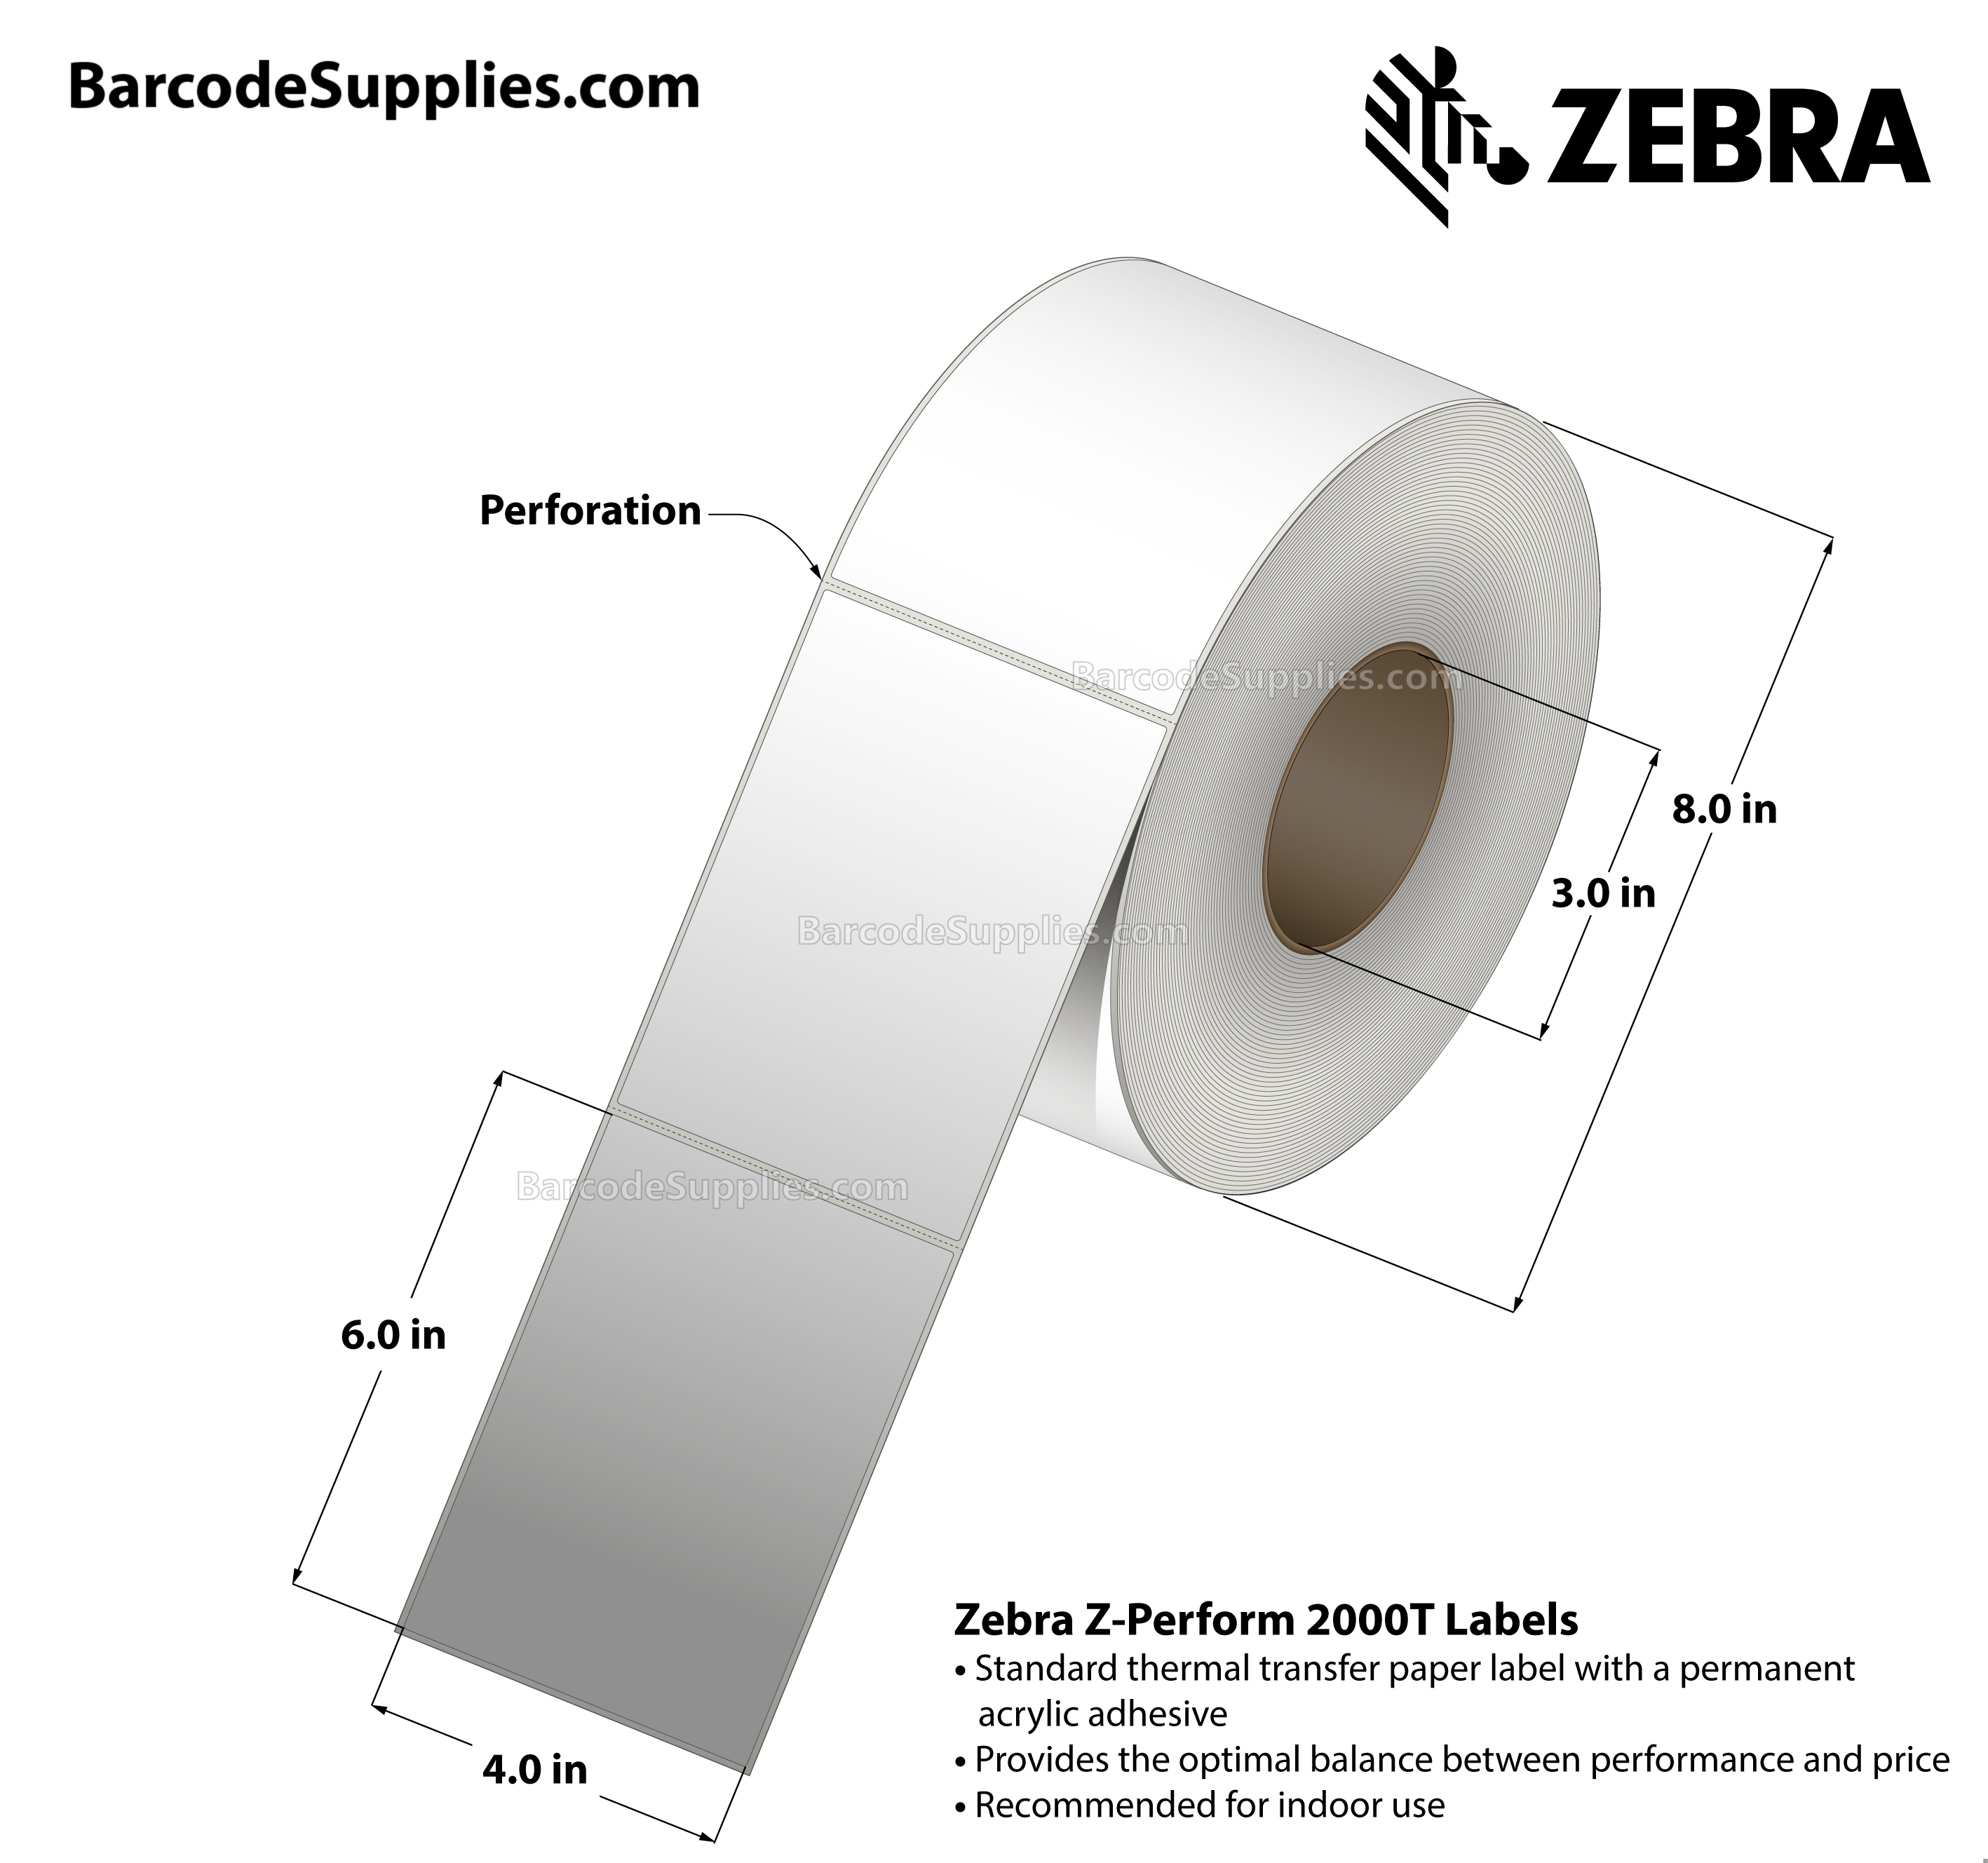 4 x 6 Thermal Transfer White Z-Perform 2000T All-Temp Labels With All-Temp Adhesive - Perforated - 950 Labels Per Roll - Carton Of 4 Rolls - 3800 Labels Total - MPN: 72376